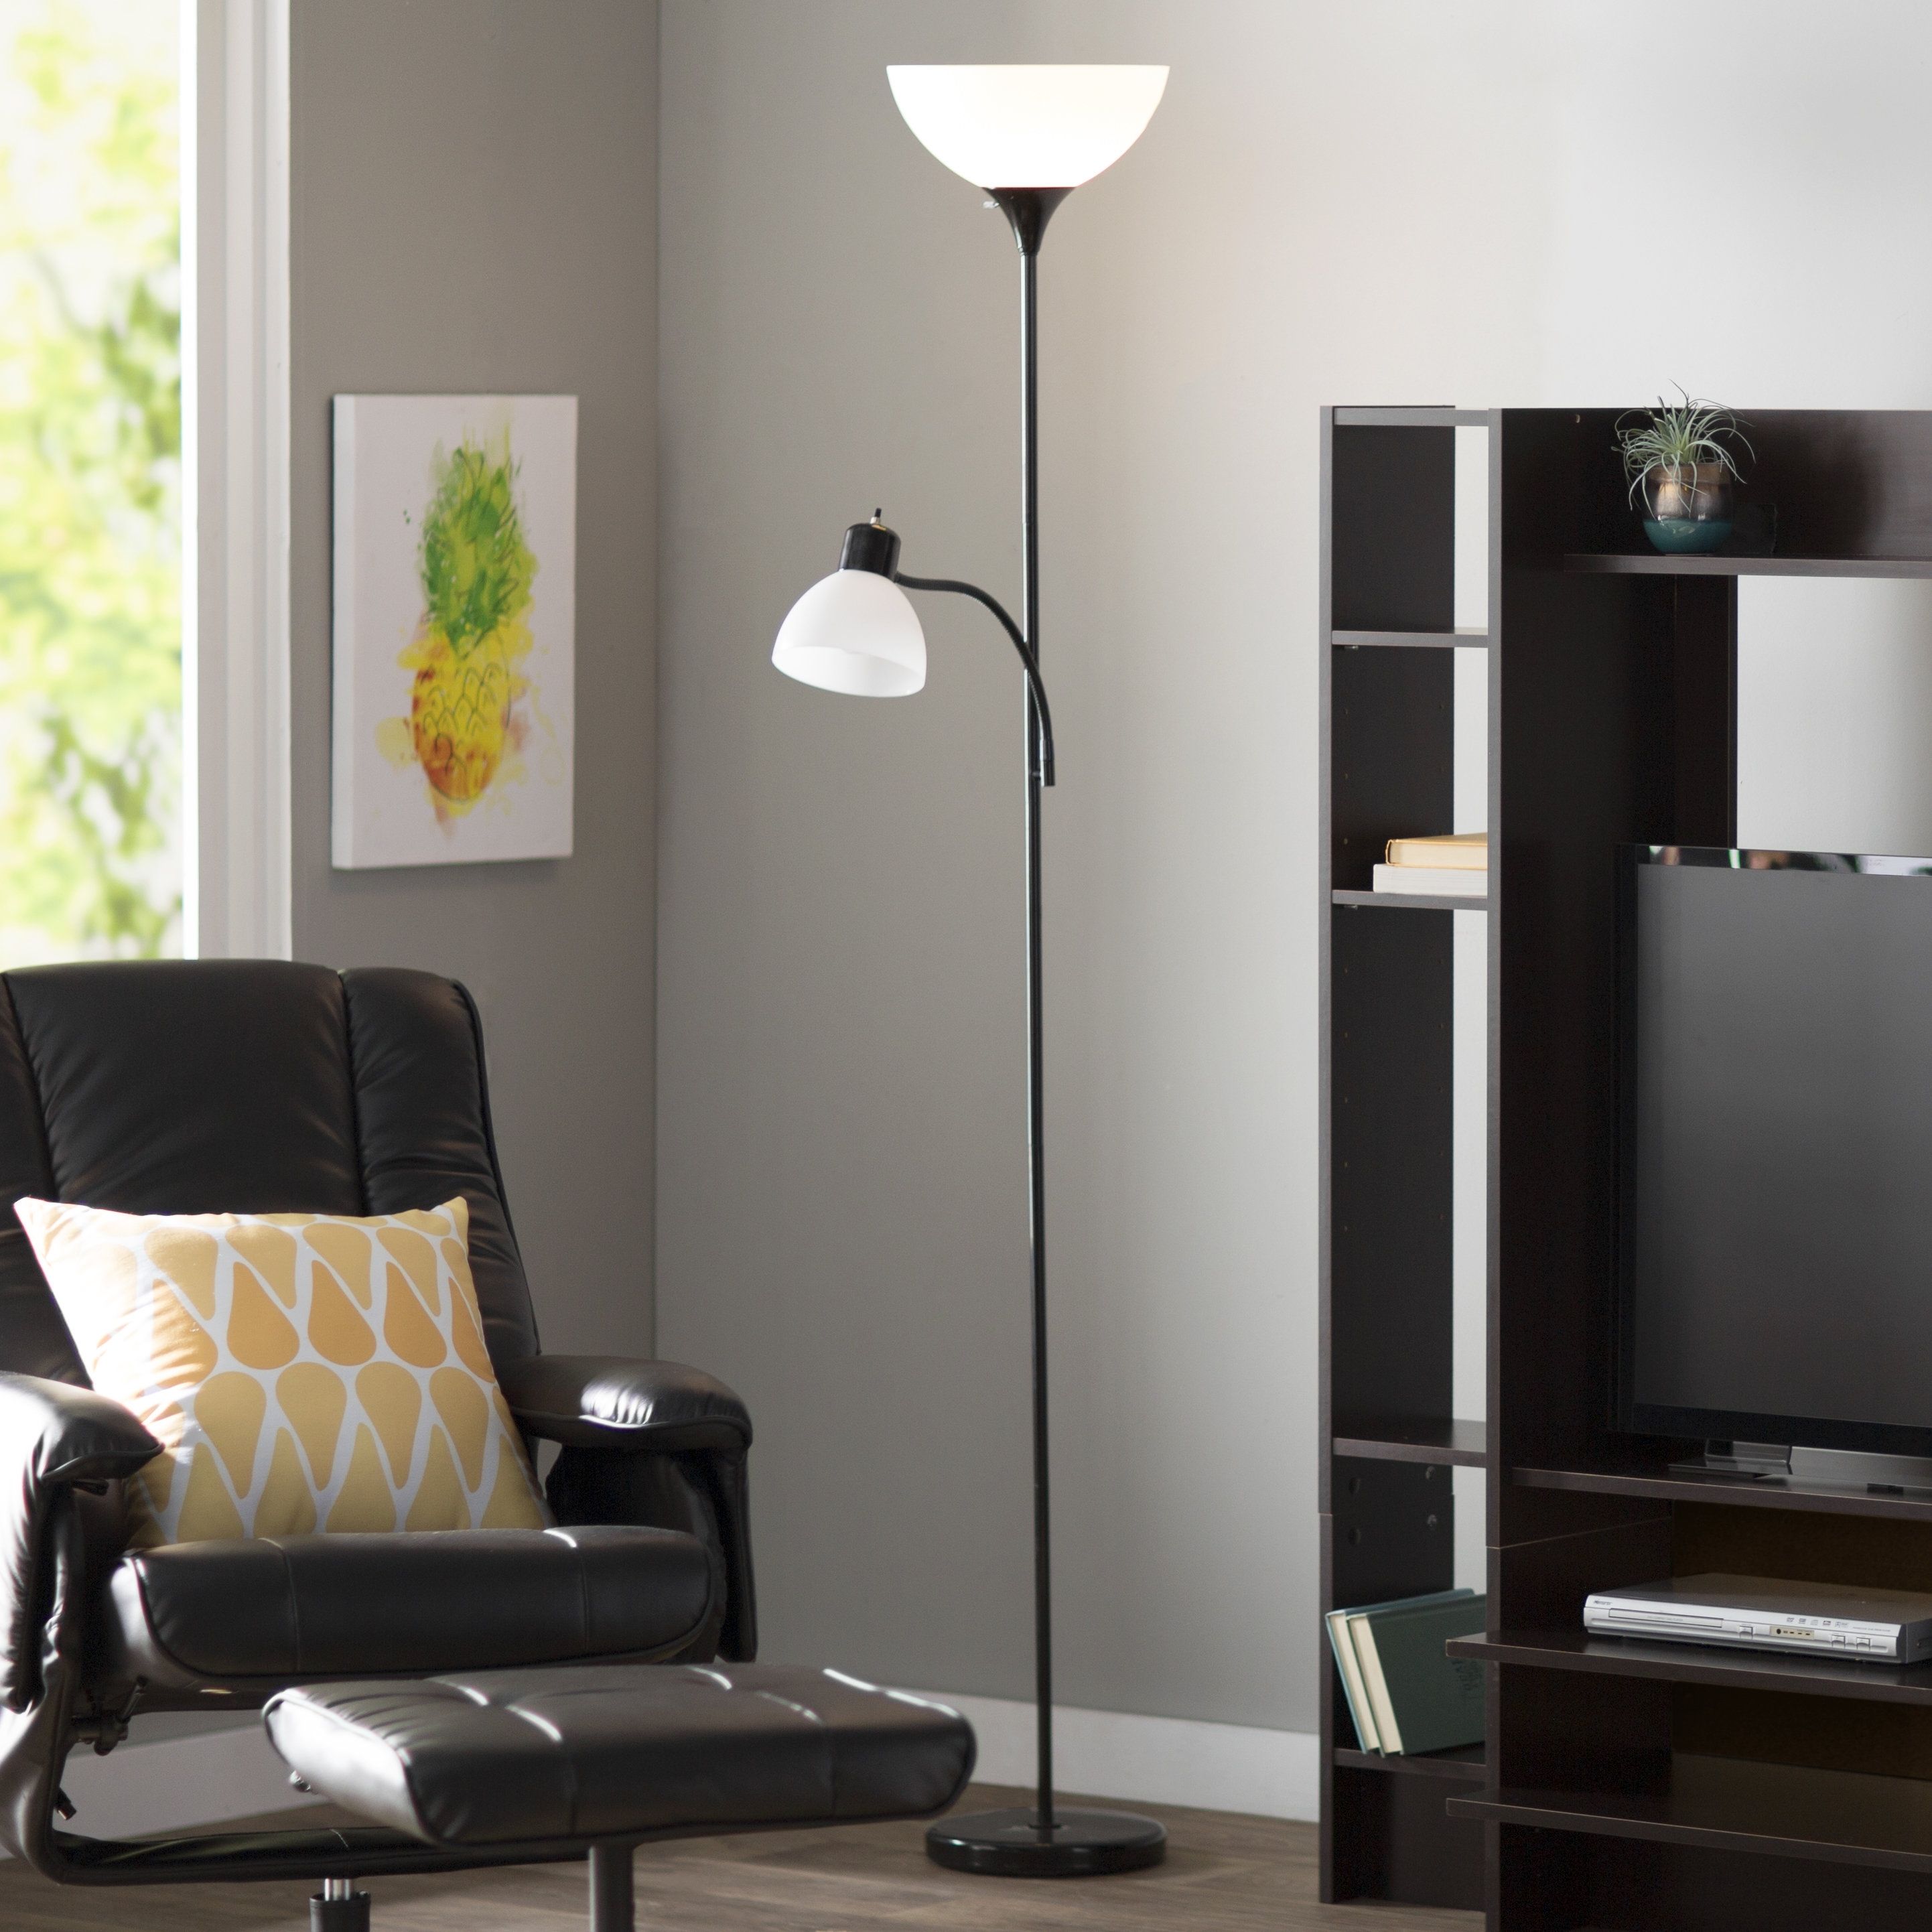 Floor Lamps You'll Love | Wayfair Pertaining To Wayfair Living Room Table Lamps (View 3 of 15)